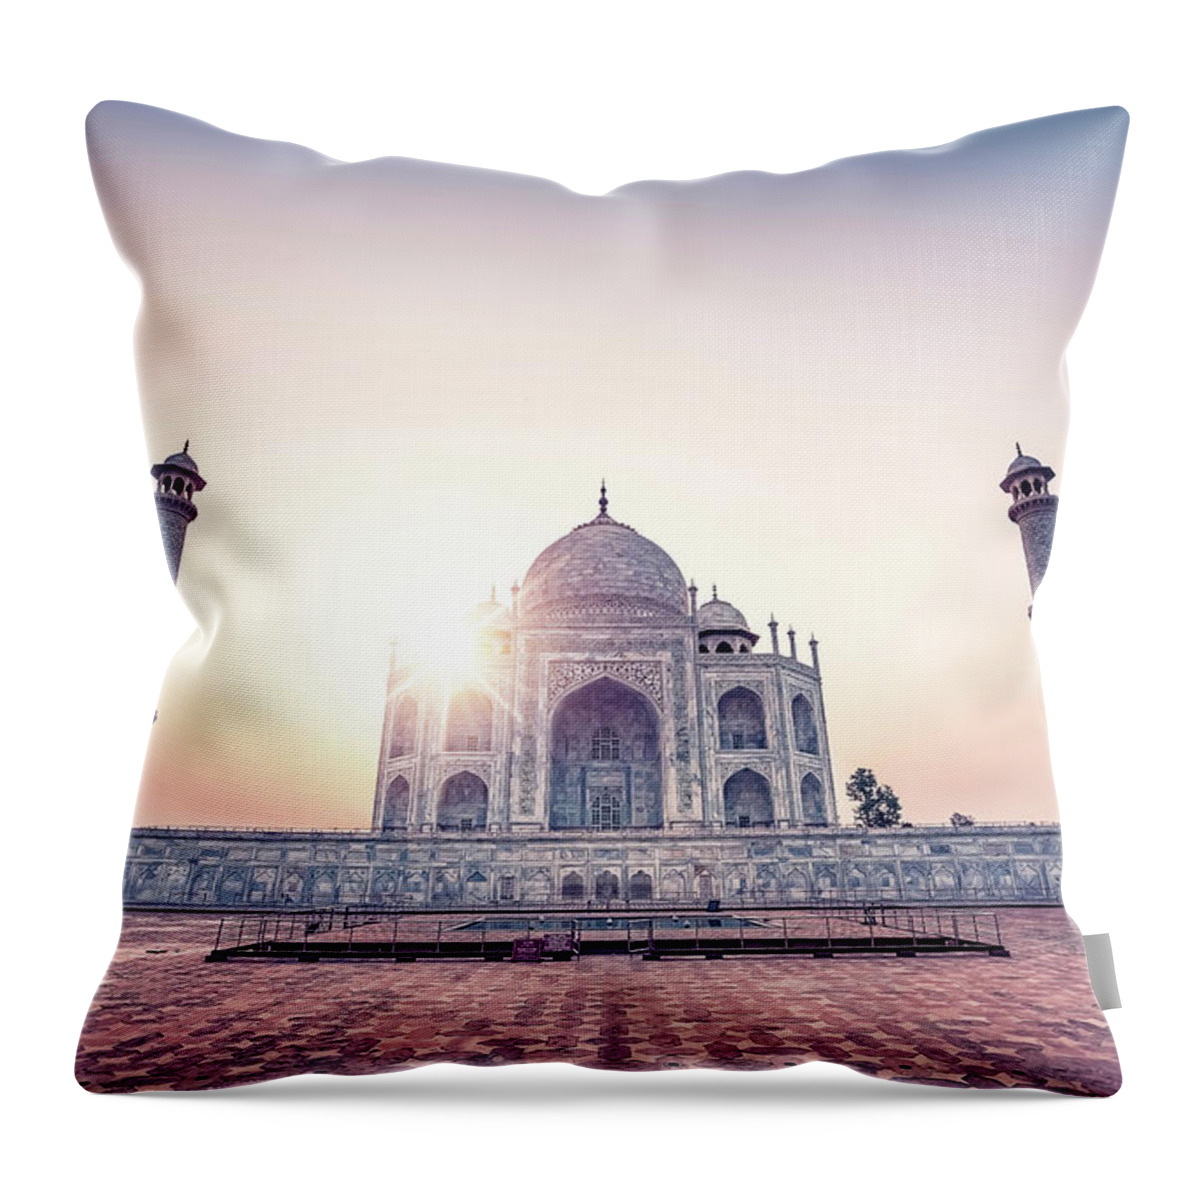 Architecture Throw Pillow featuring the photograph Morning In Agra by Manjik Pictures